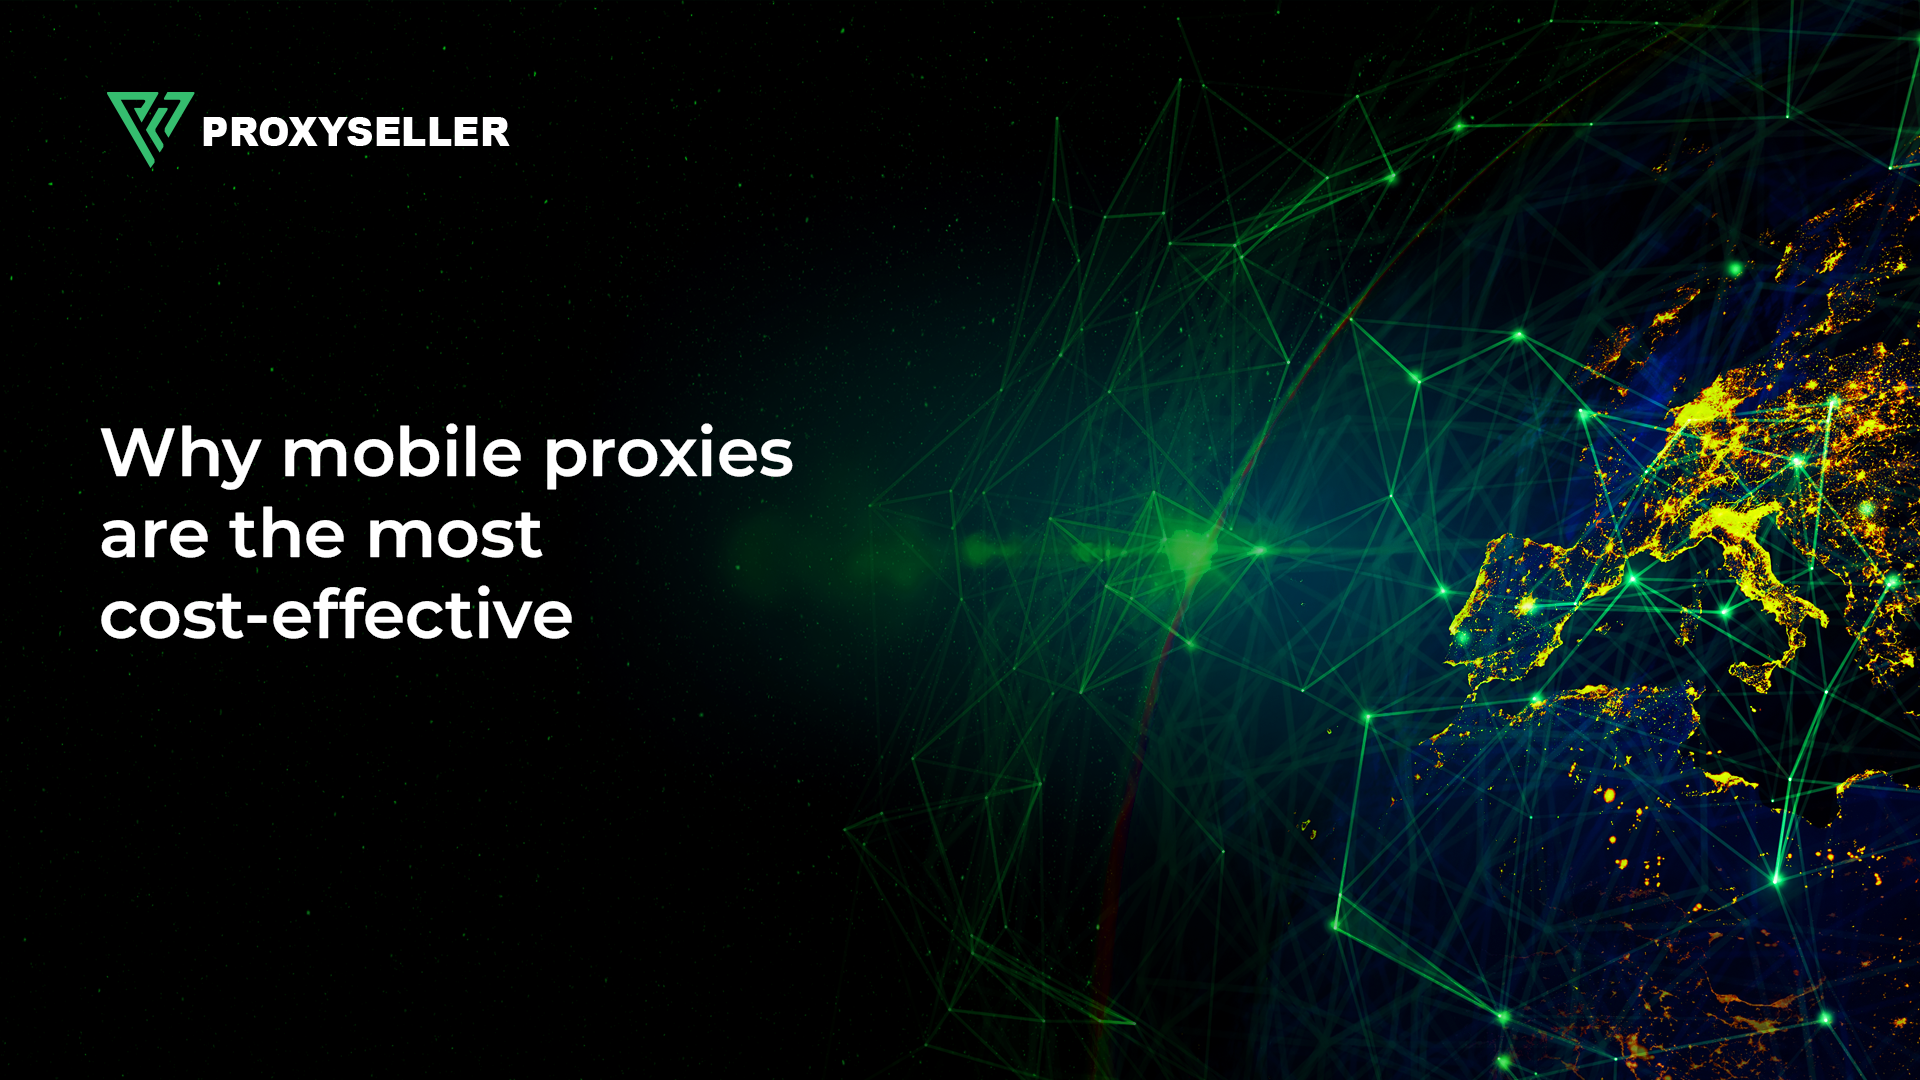  Why mobile proxies are the most cost-effective_.png